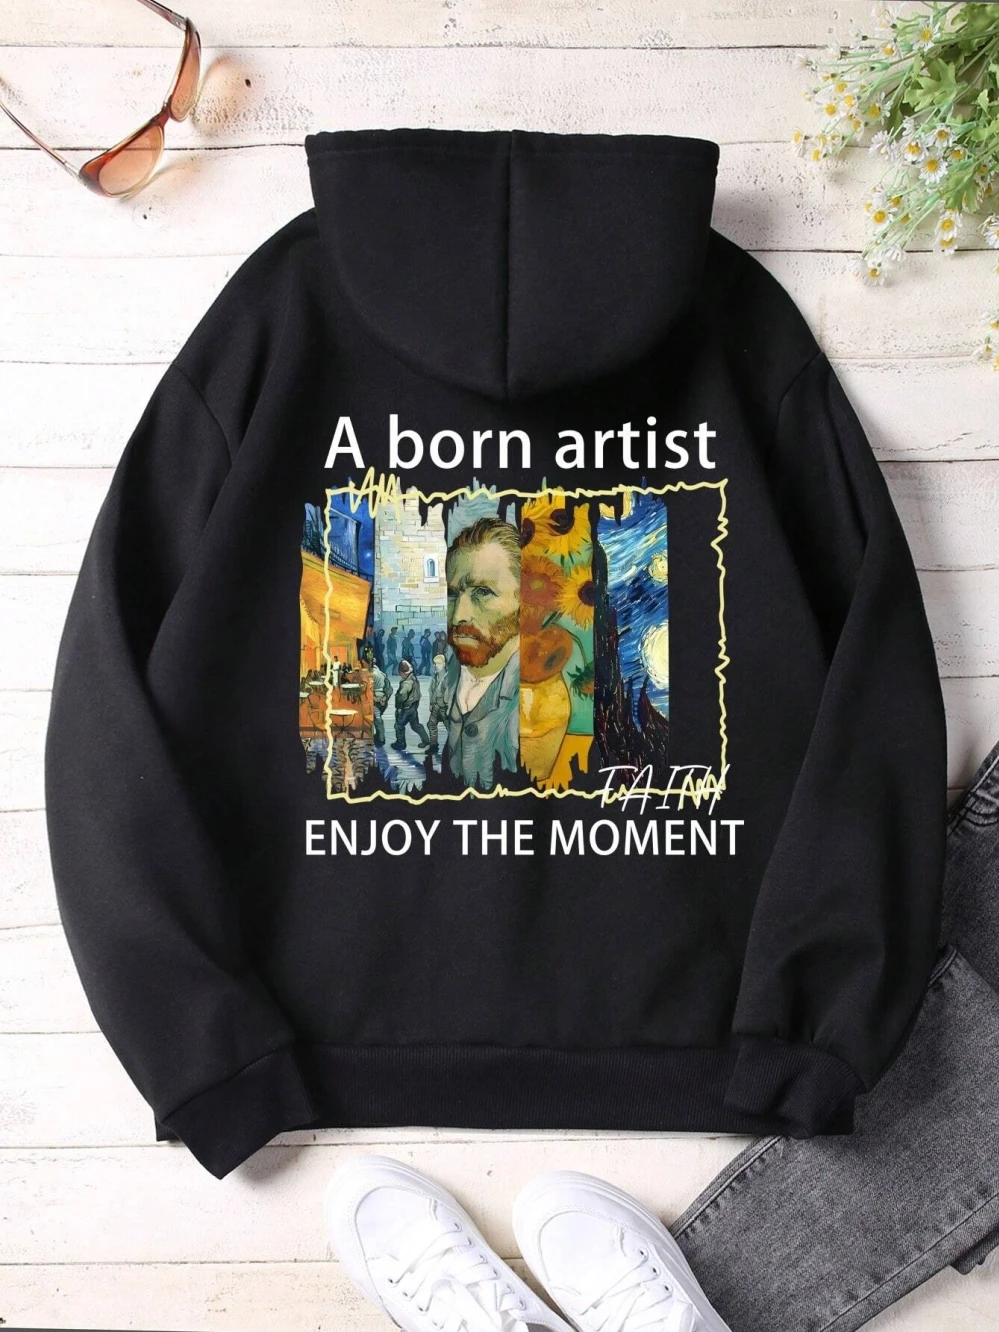 

A Born Artist Enhoy The Moment Van Gogh's Works Female Hoody Fashion Casual Hooded S-XXL Autumn Hoodies Warm OversizedClothes